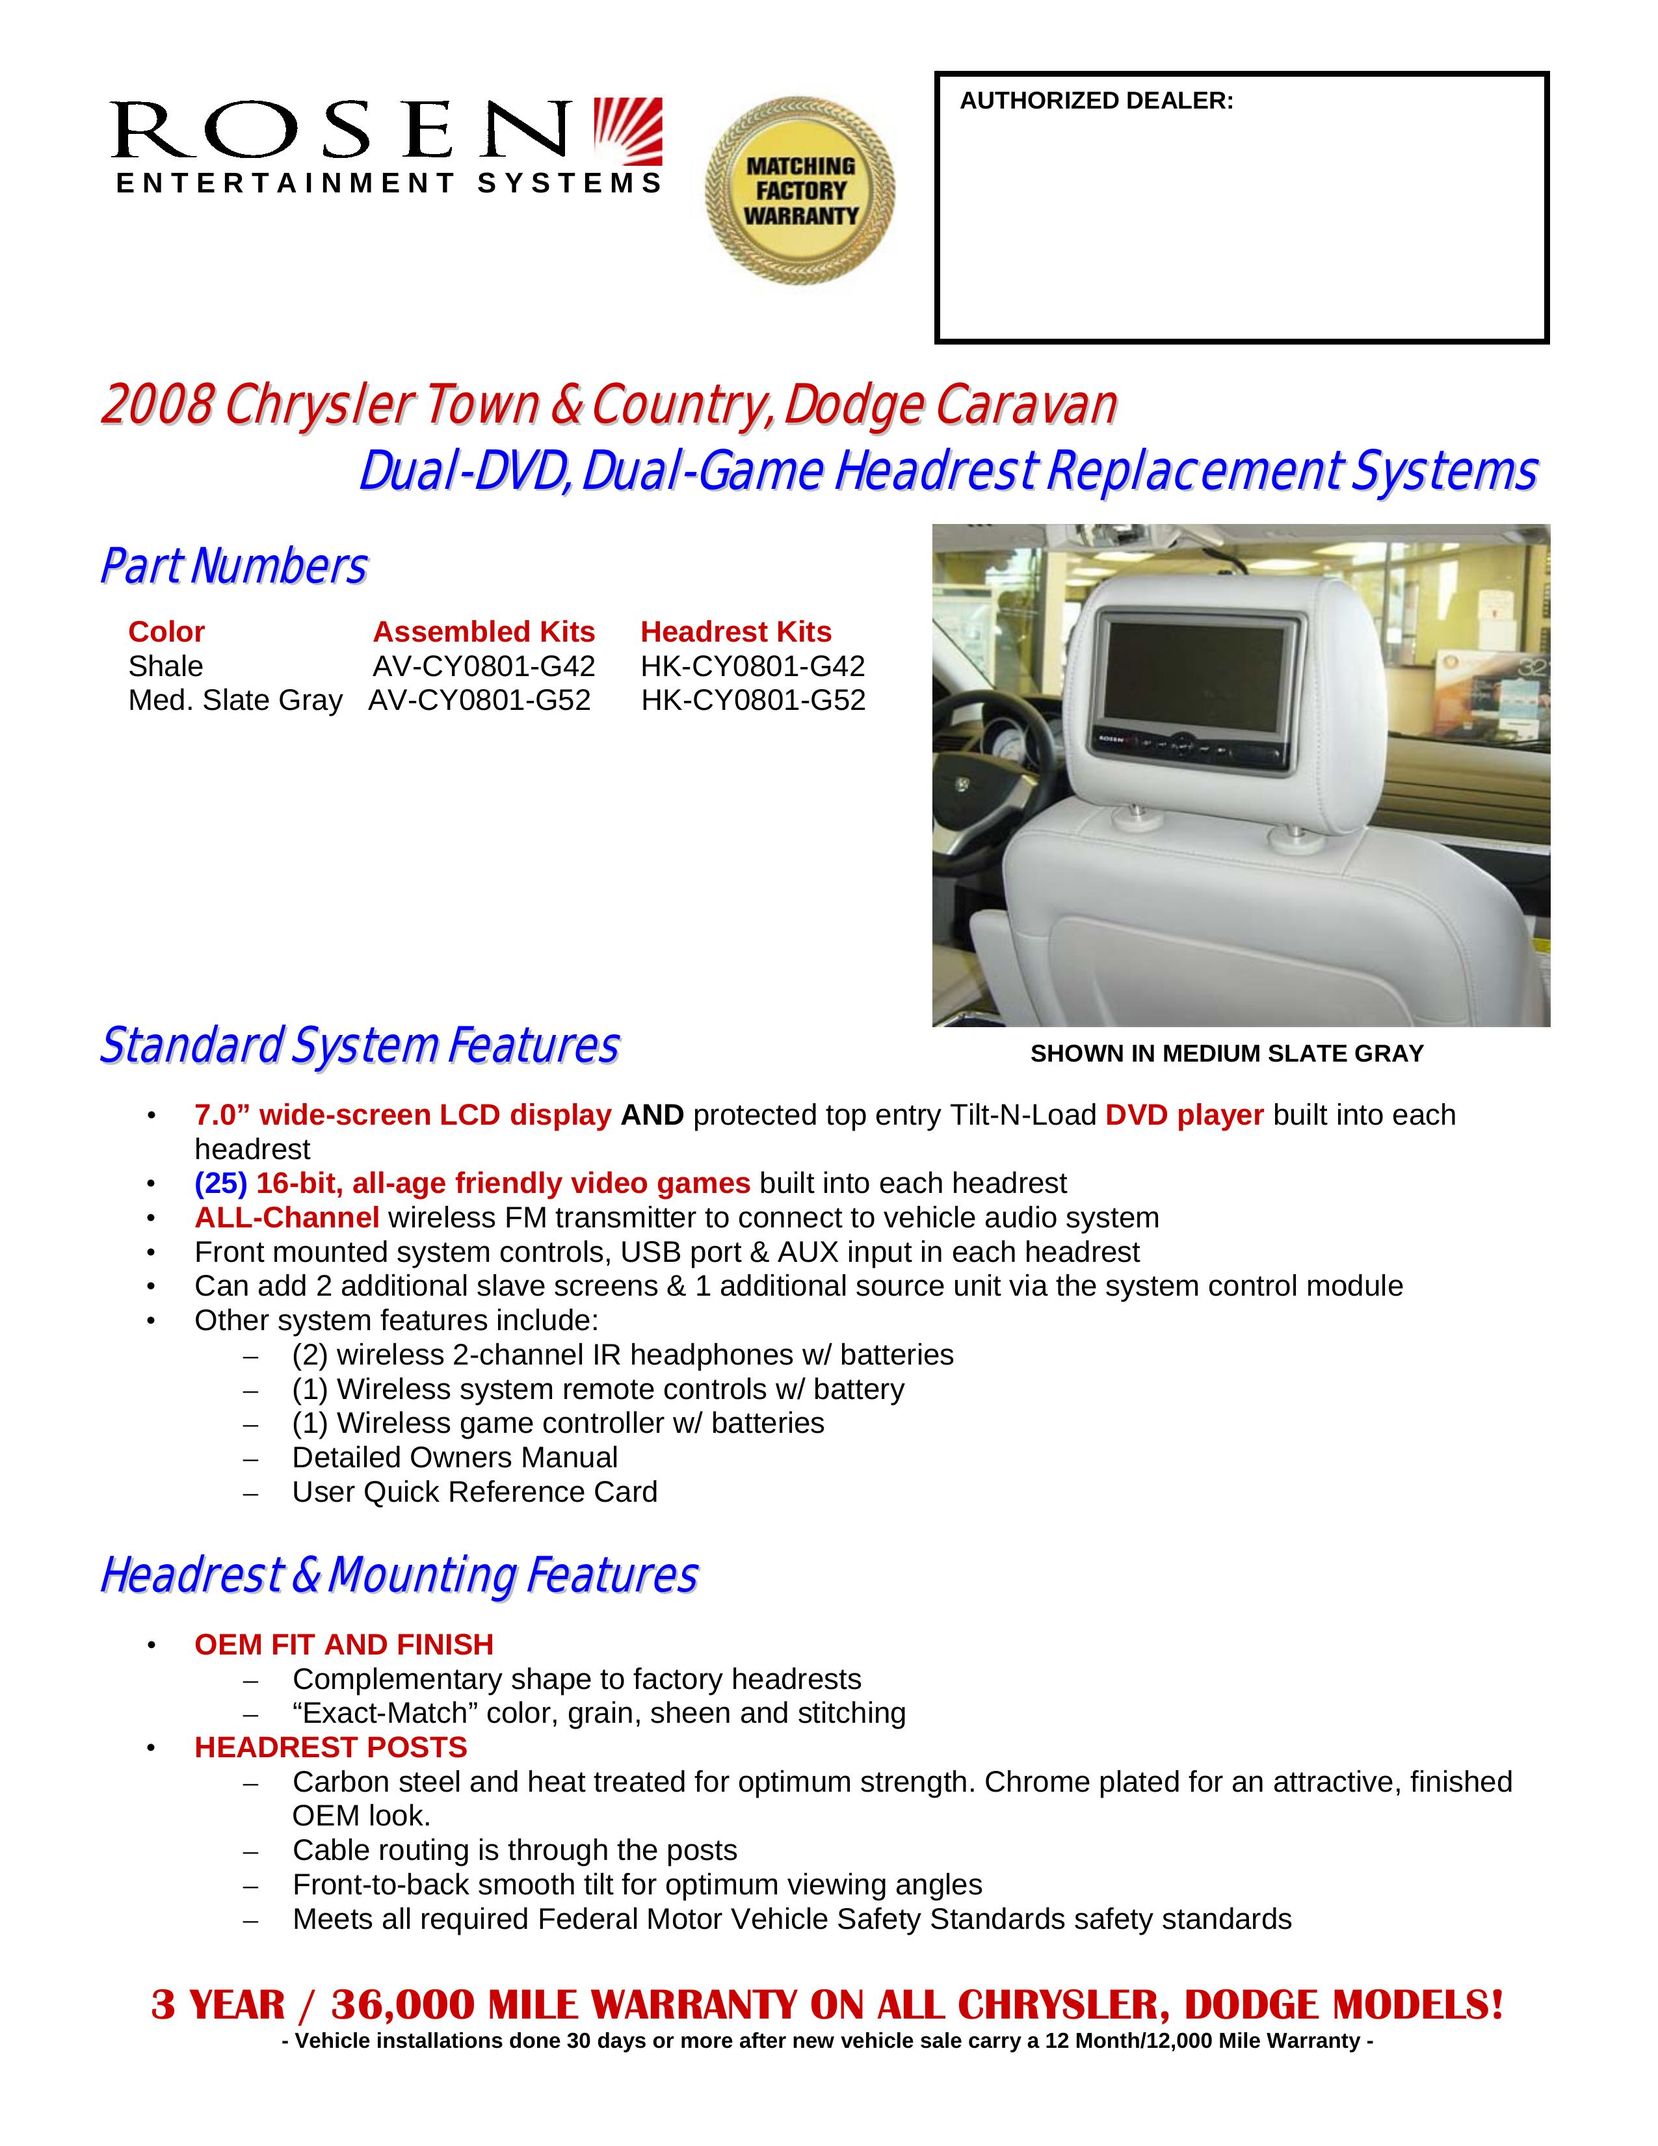 Rosen Entertainment Systems HK-CY0801-G52 Car Video System User Manual